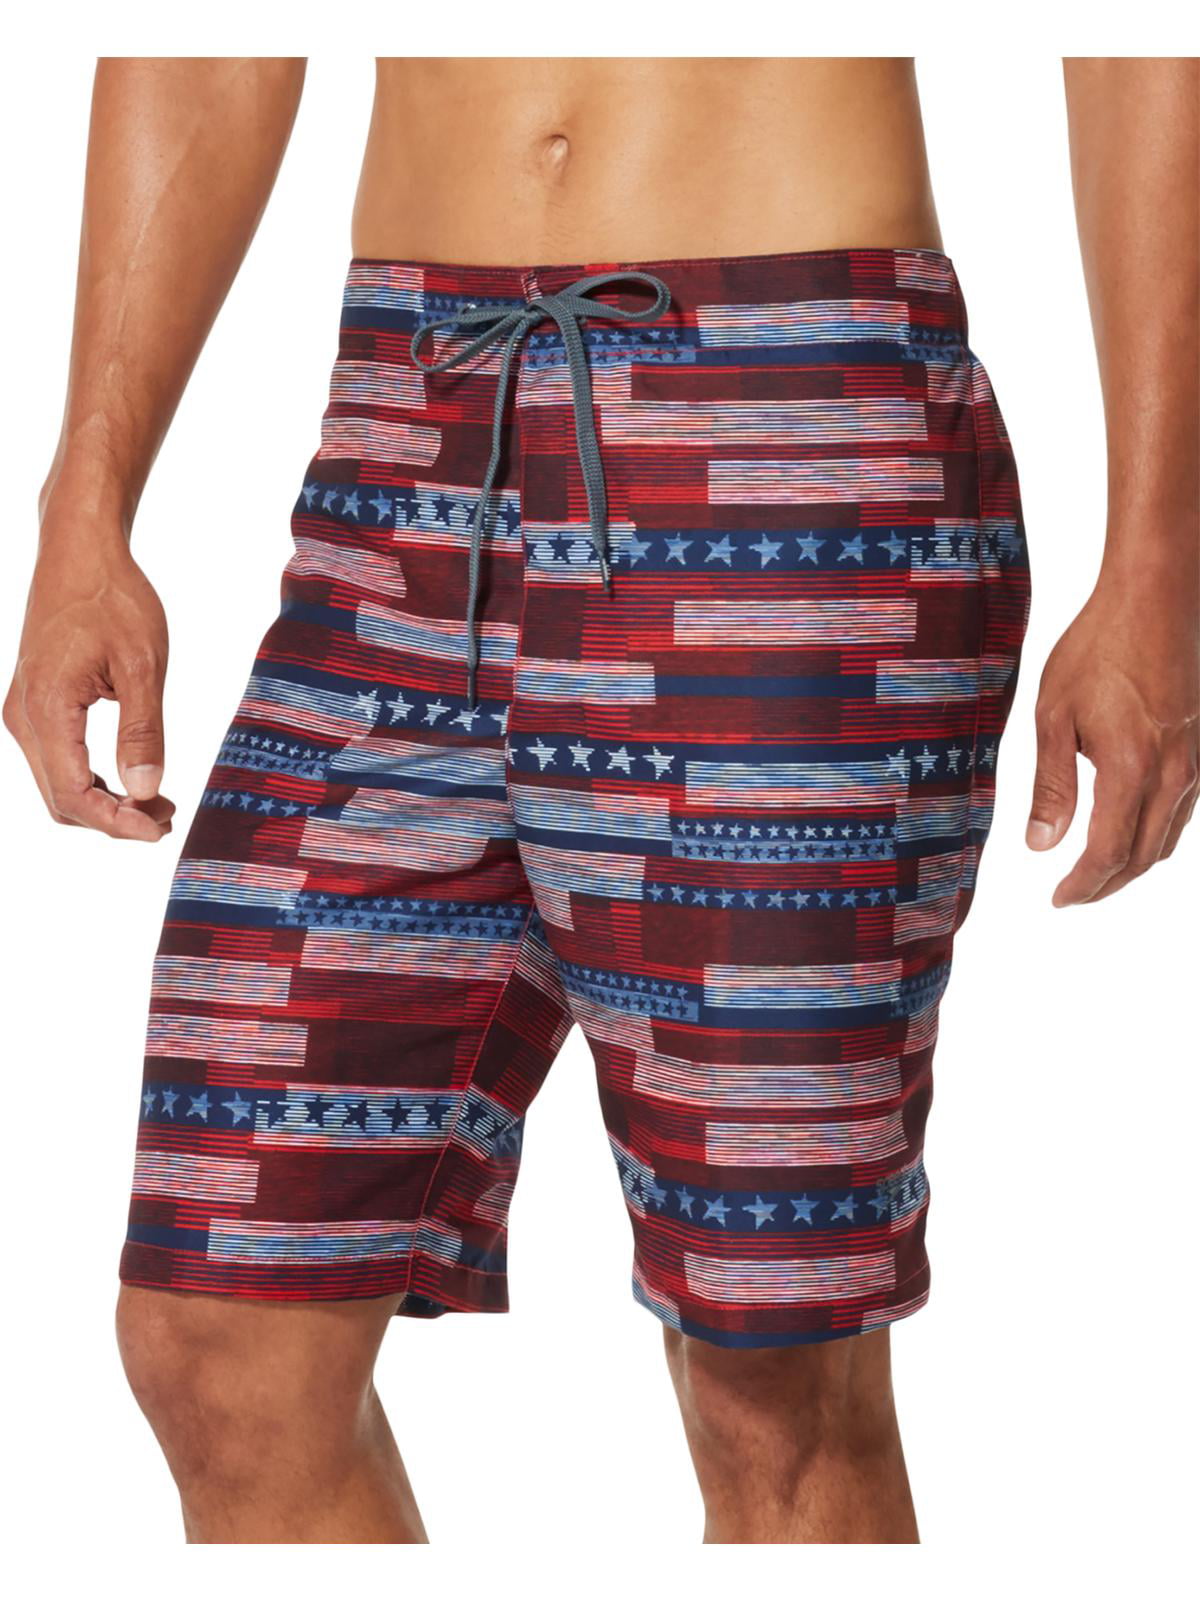 Fire Fire Wolf Mens Beach Pants Swimming Trunks Quick-Dry Boardshorts with Lining